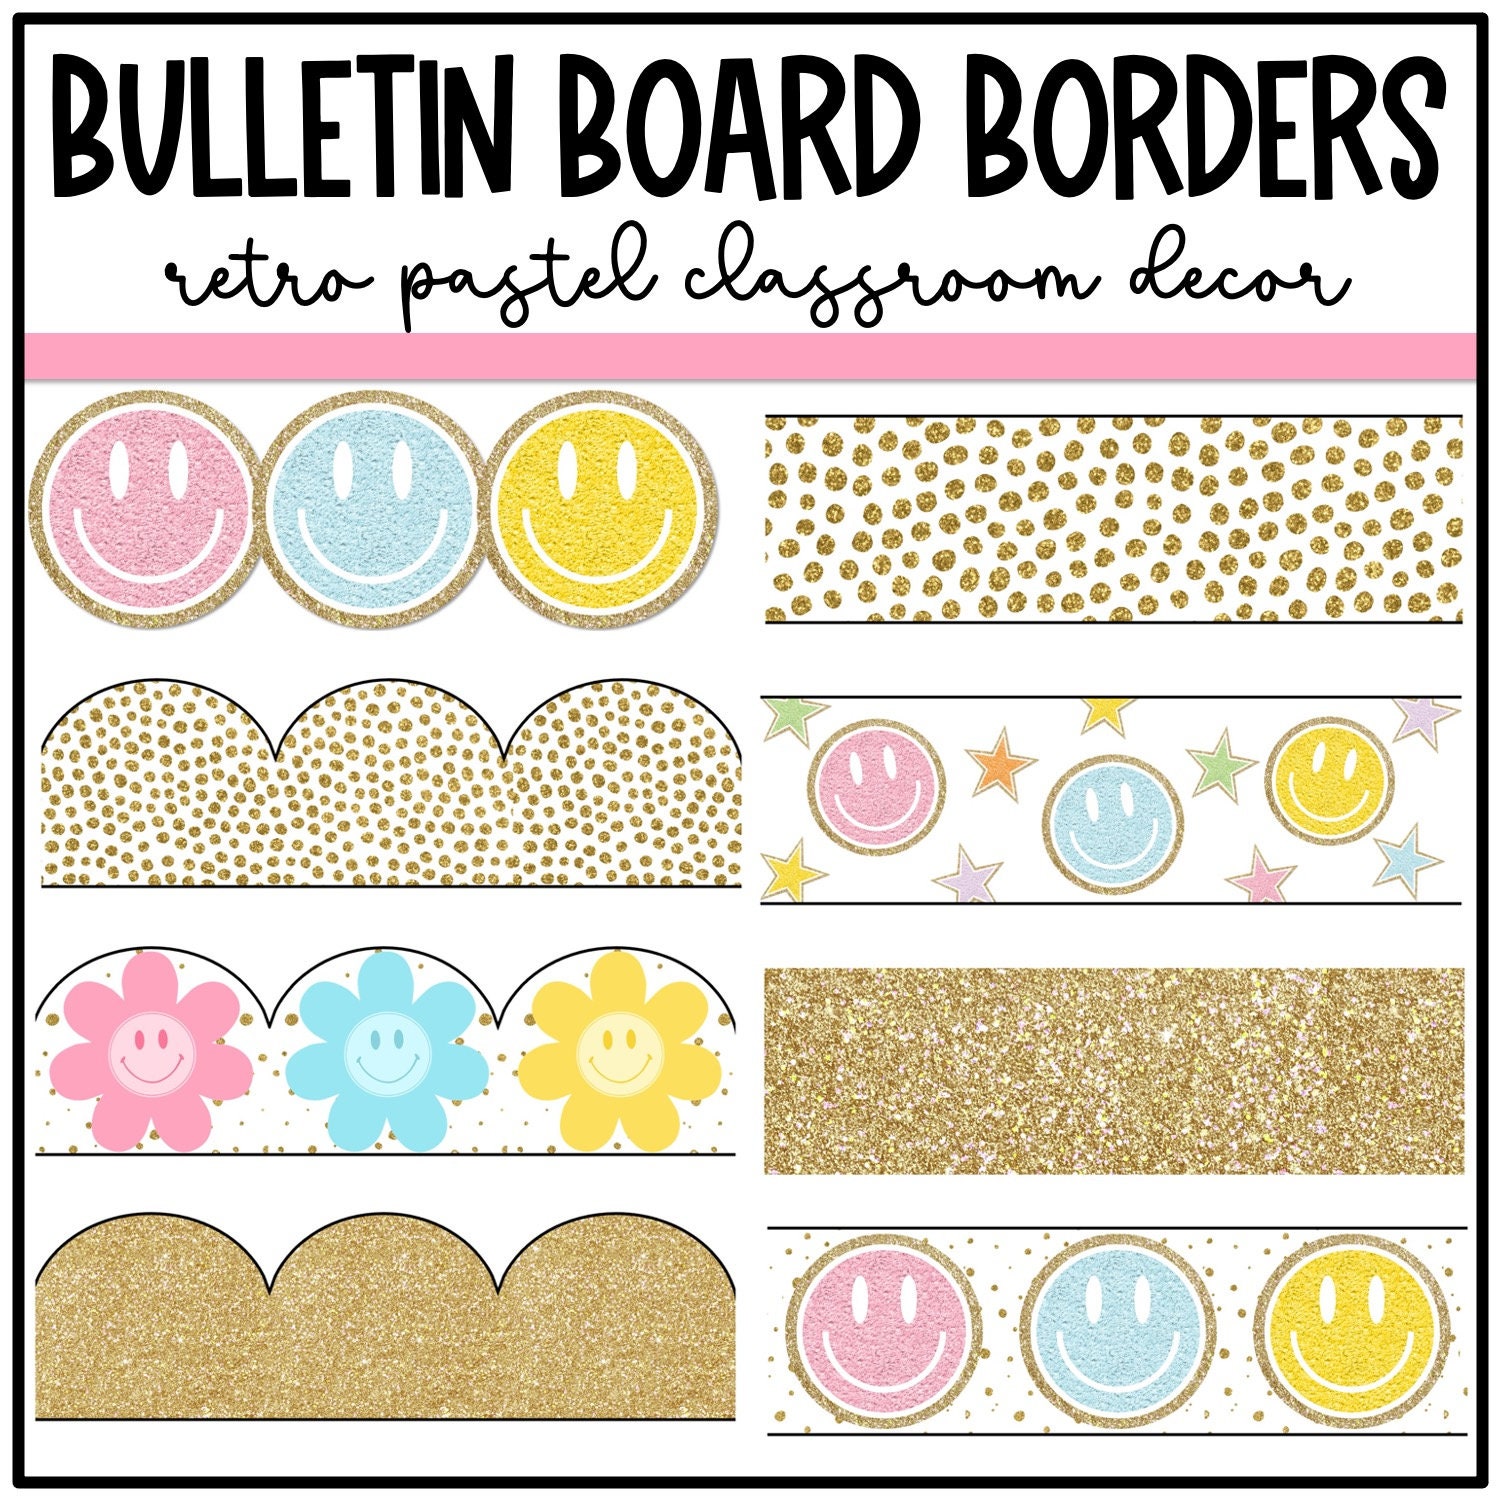 Retro Pastel Classroom Decor: Smiley Face Patches by Learning with Kiki